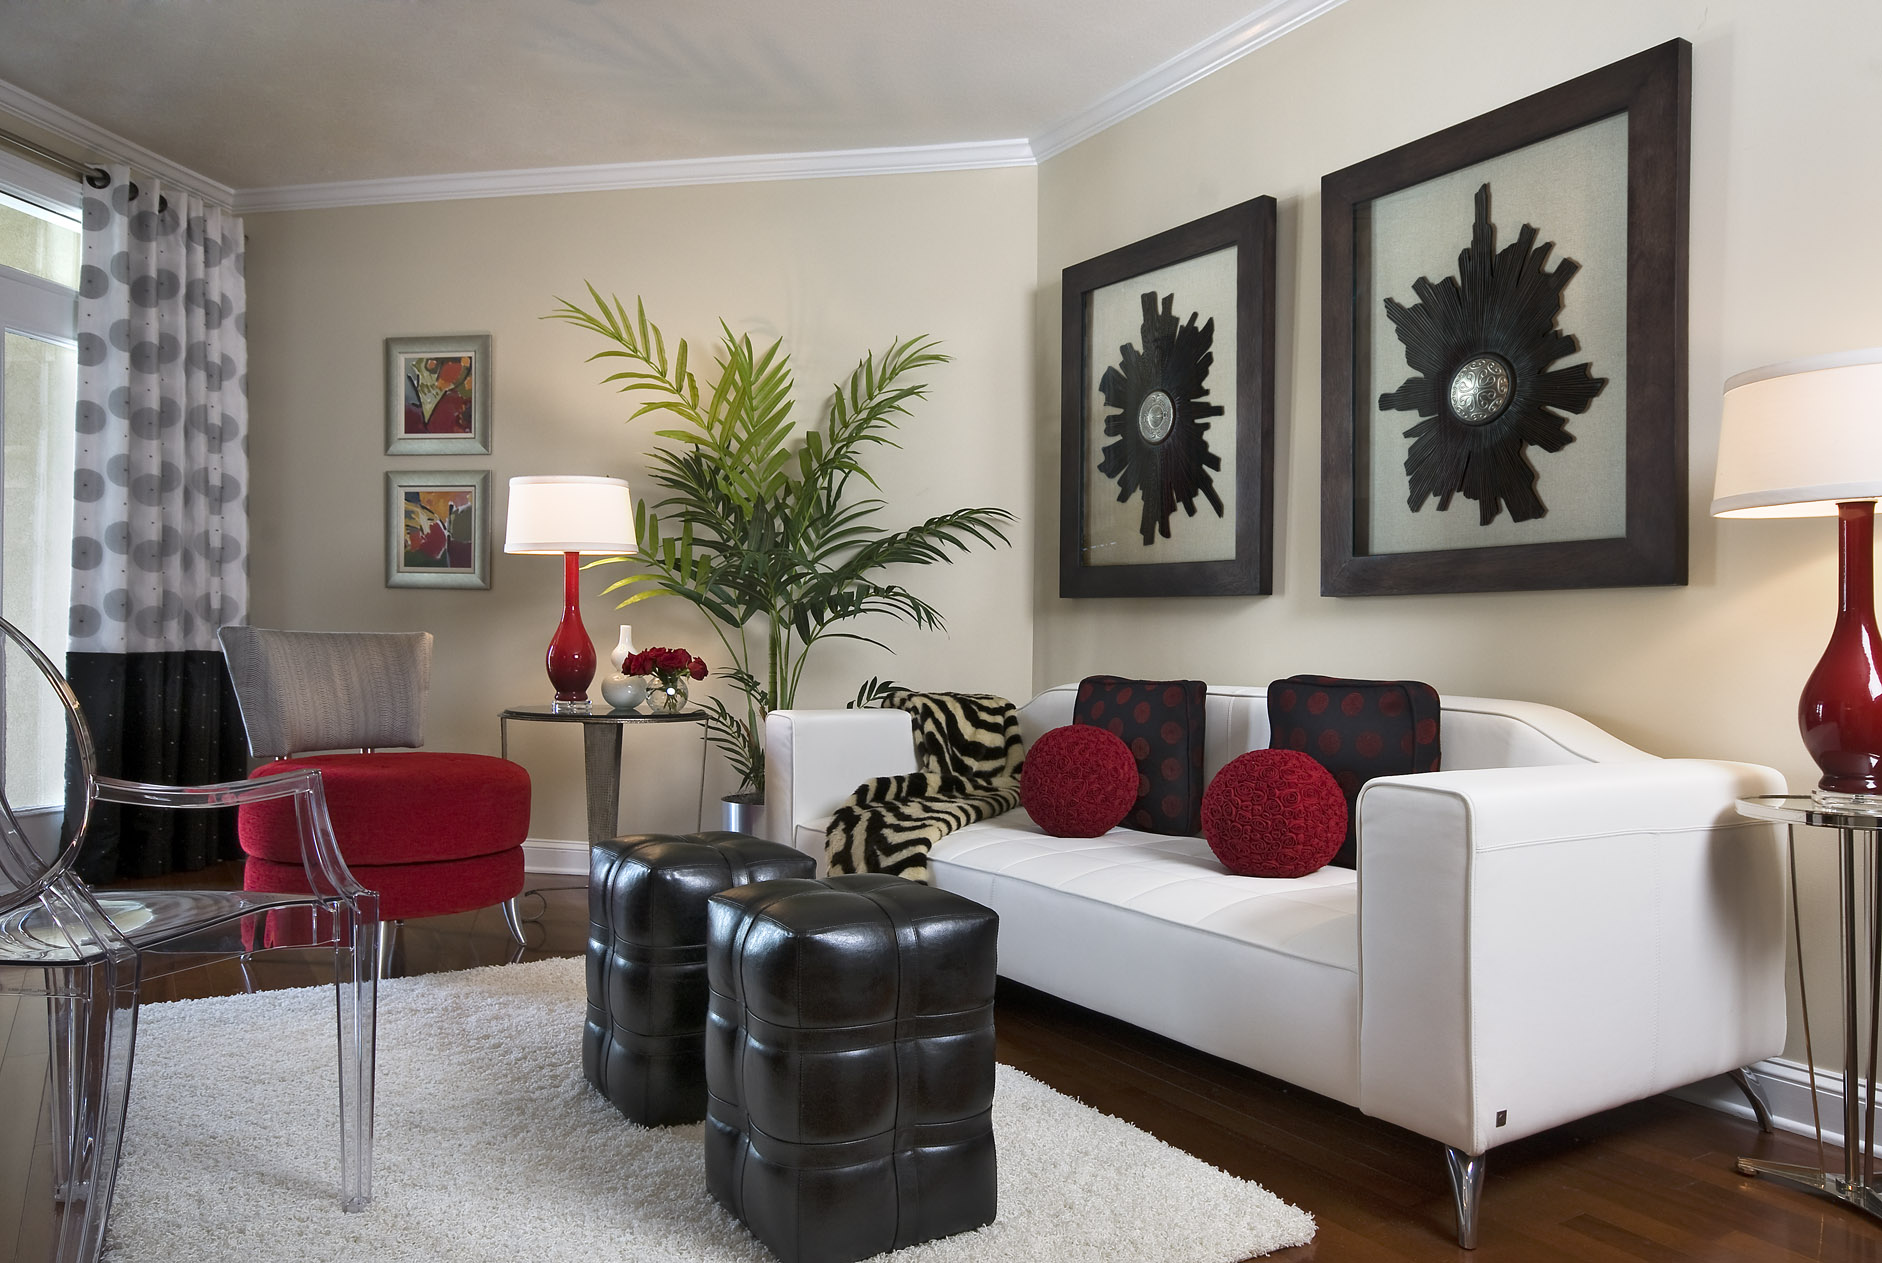 Small Living Room Decorating Ideas On a Budget